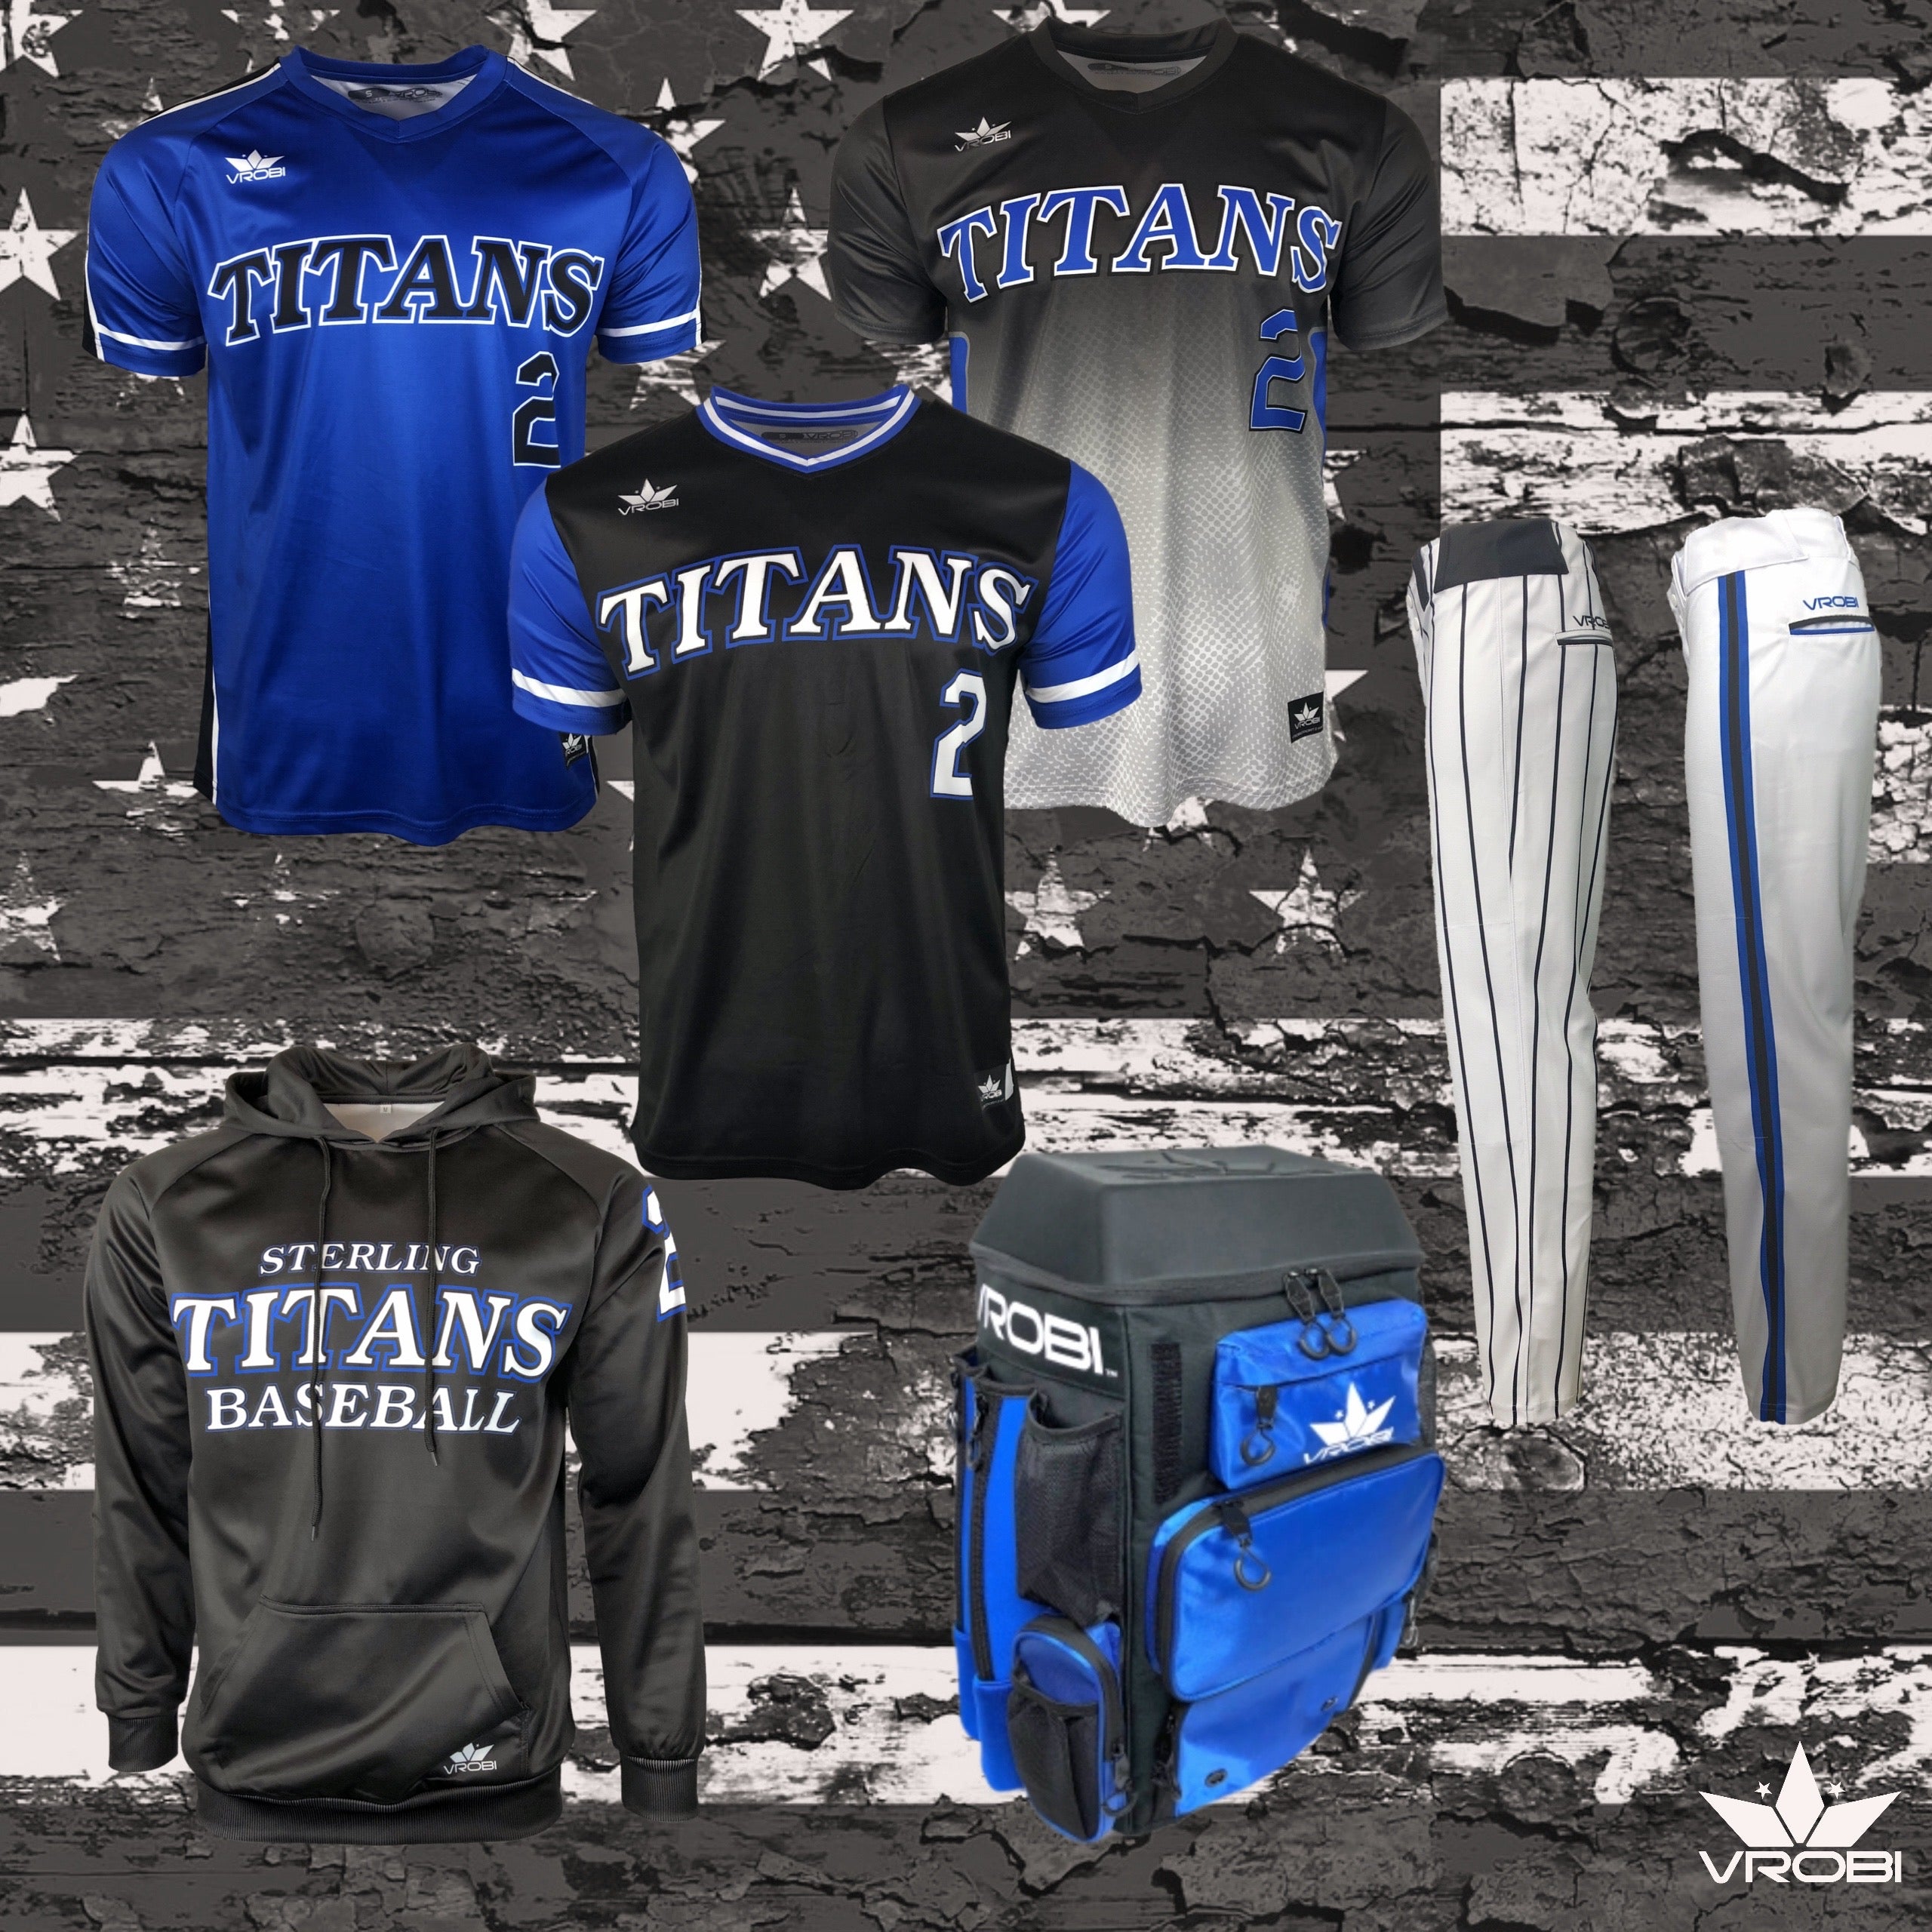 softball uniform packages with bat bag included